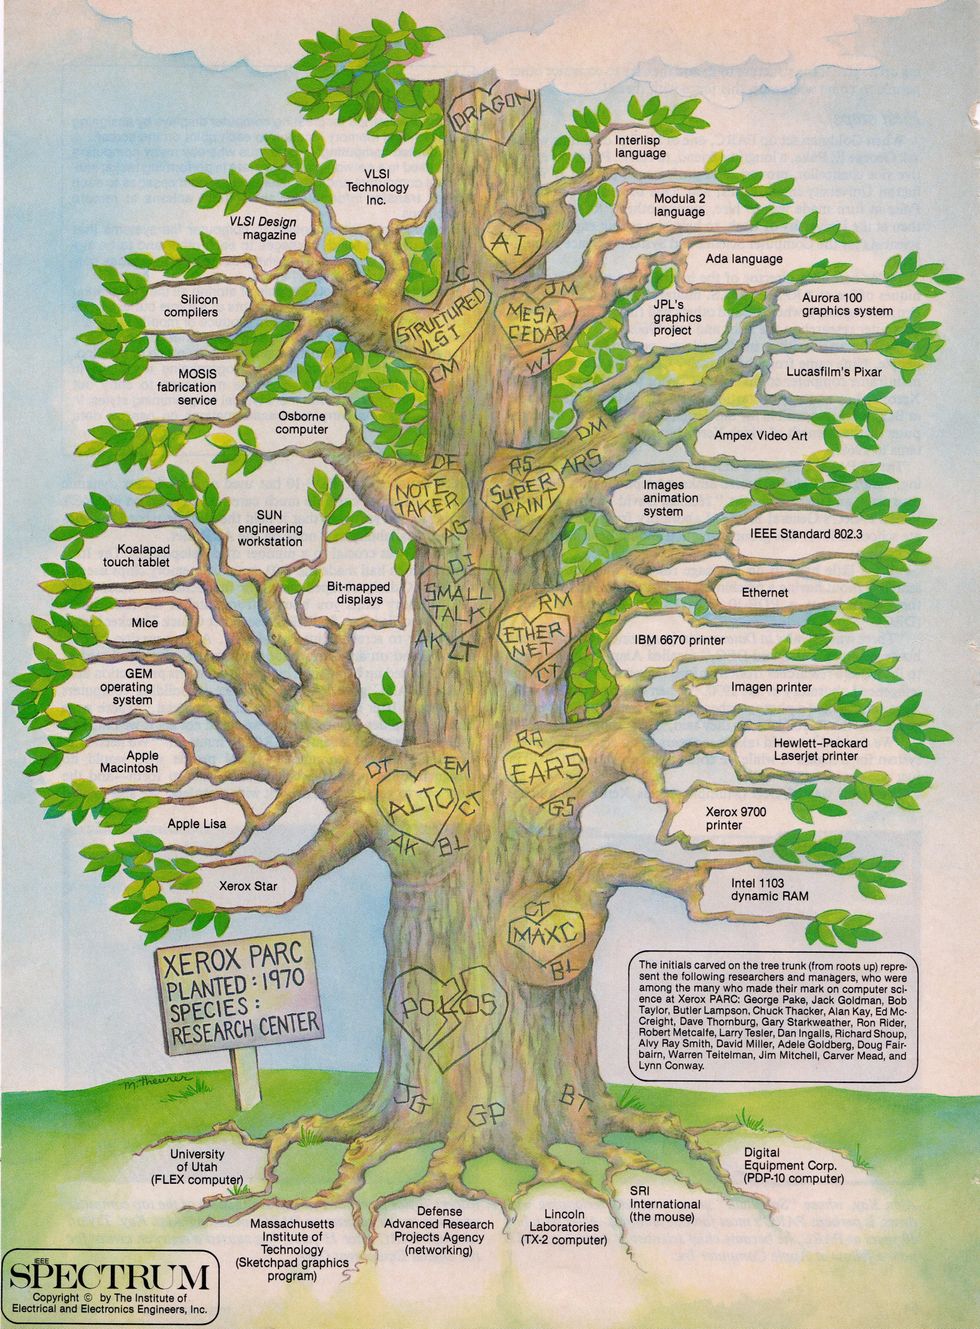 Illustration of a tree with trunk and branches representing the companies and technologies originated at PARC